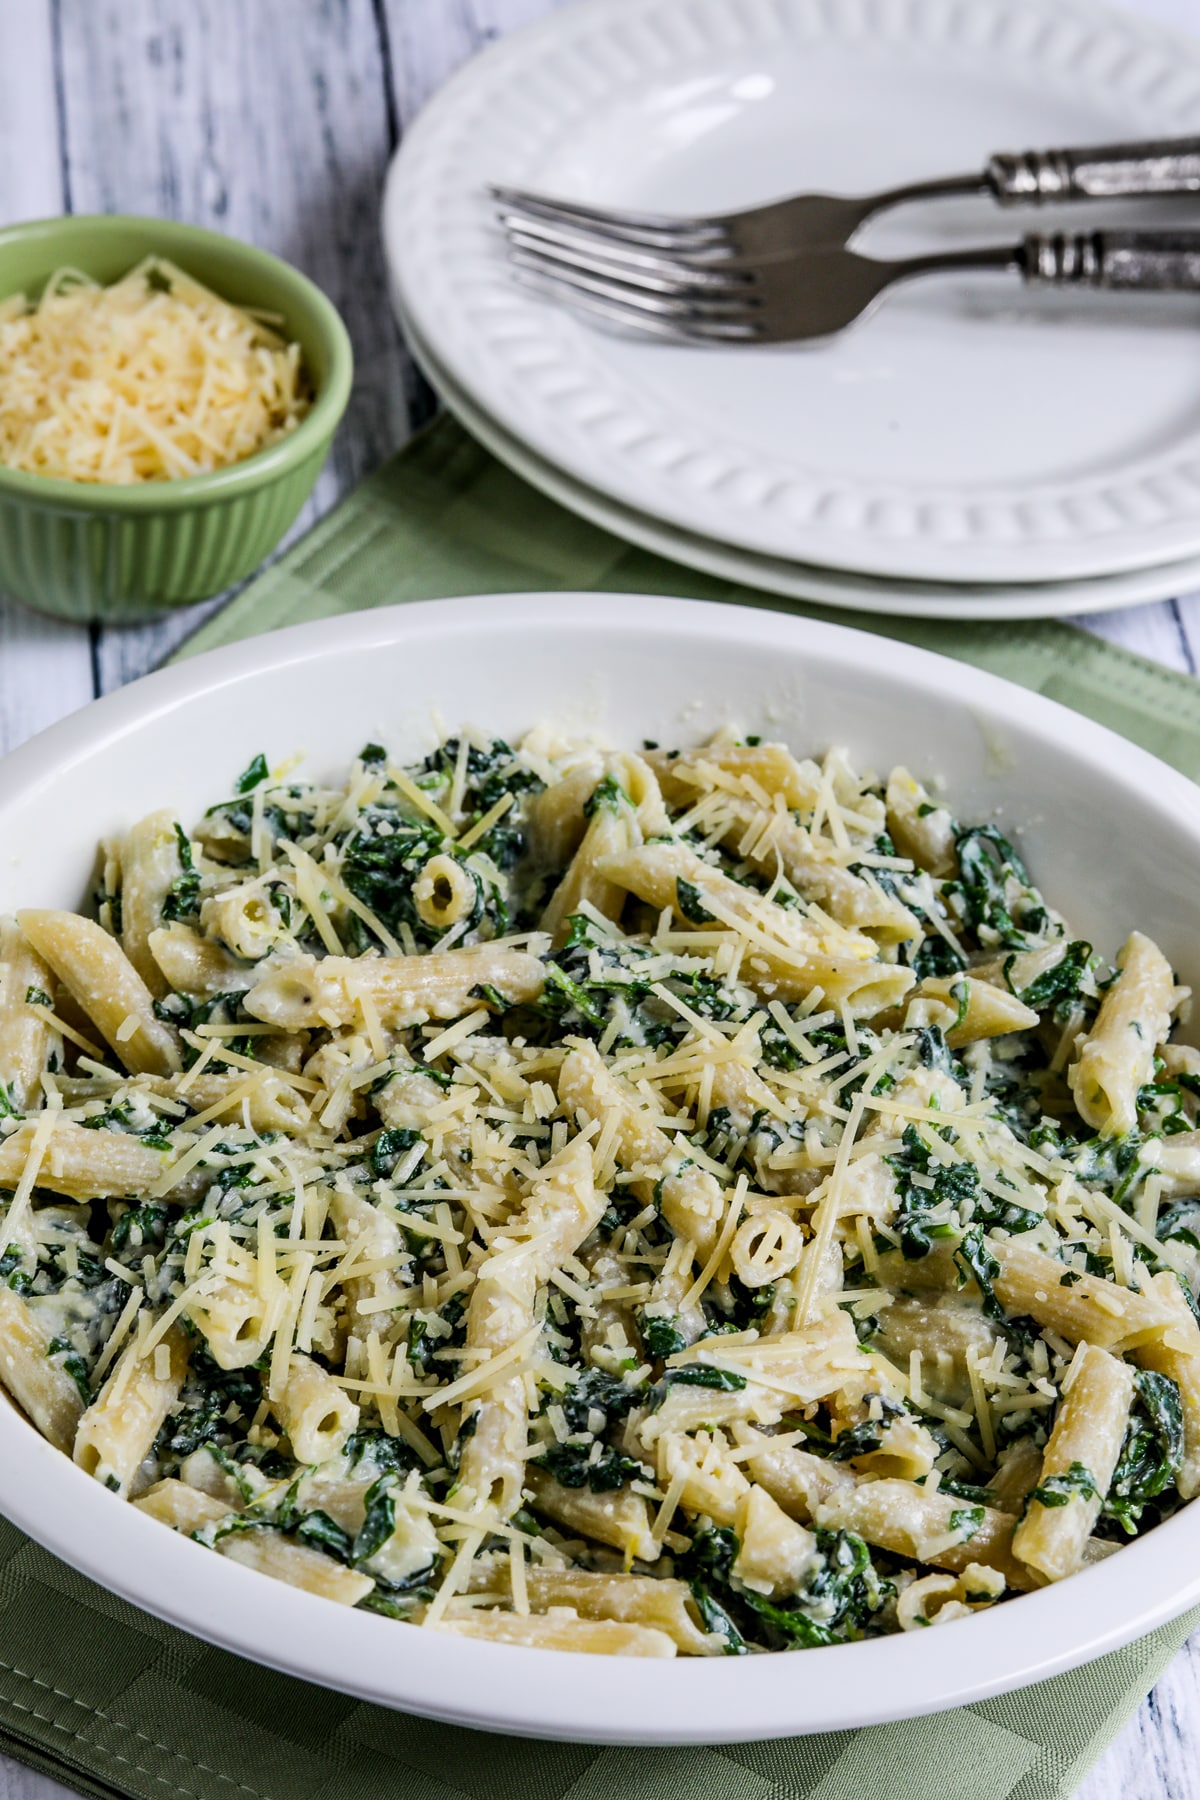 Pasta with Creamy Arugula Sauce in serving dish with plates, forks, and Parmesan.